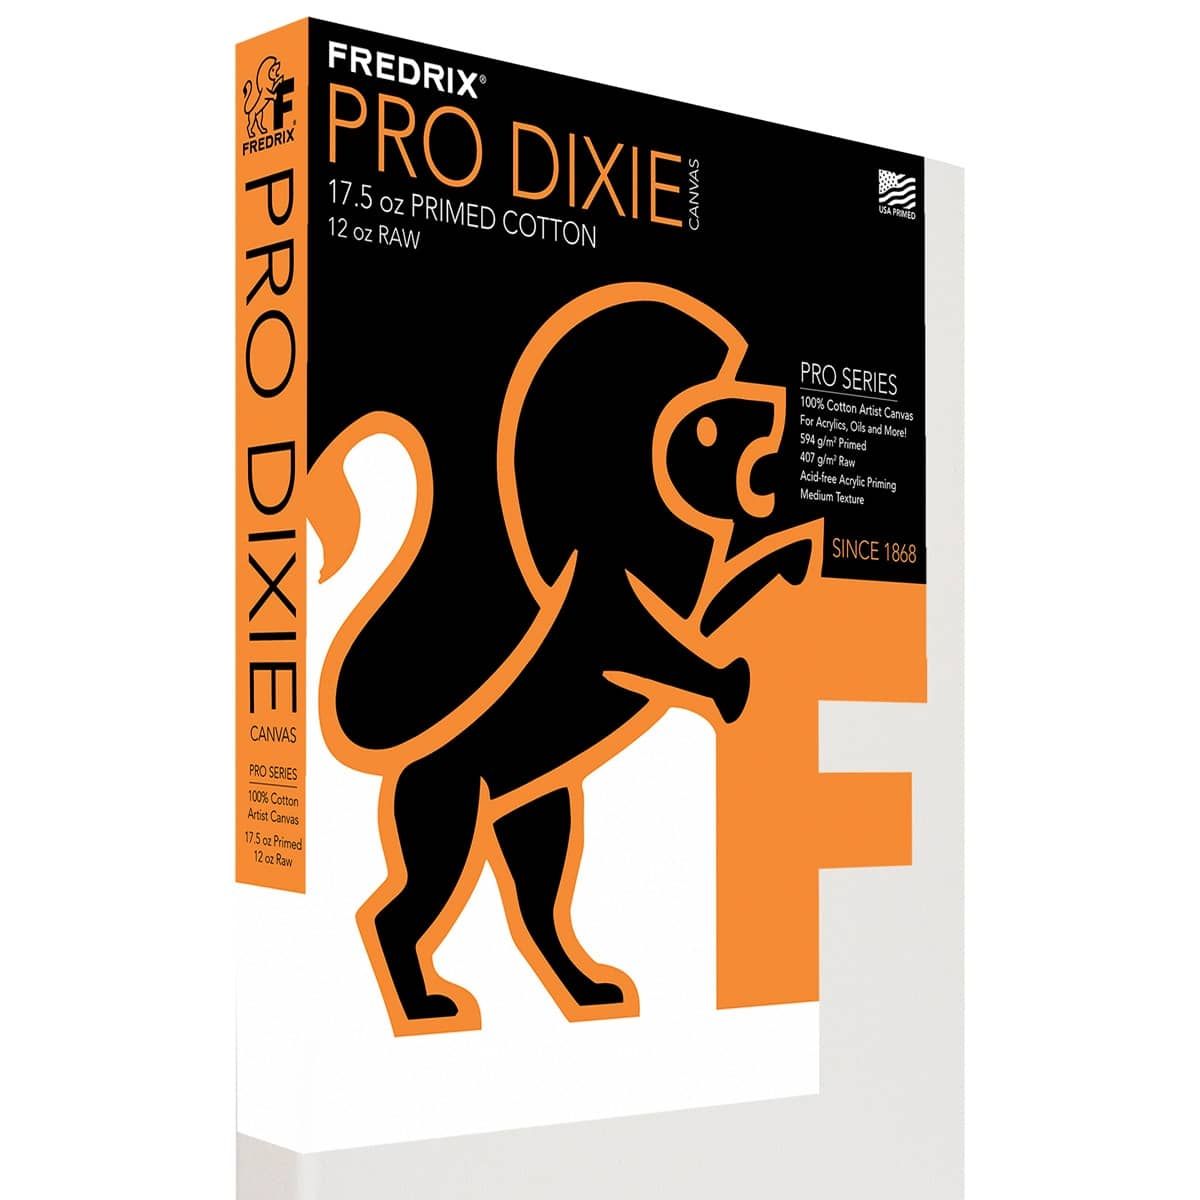 Fredrix Dixie PRO Stretched Canvas 1-3/8 in Deep (Box of 3) 72x96